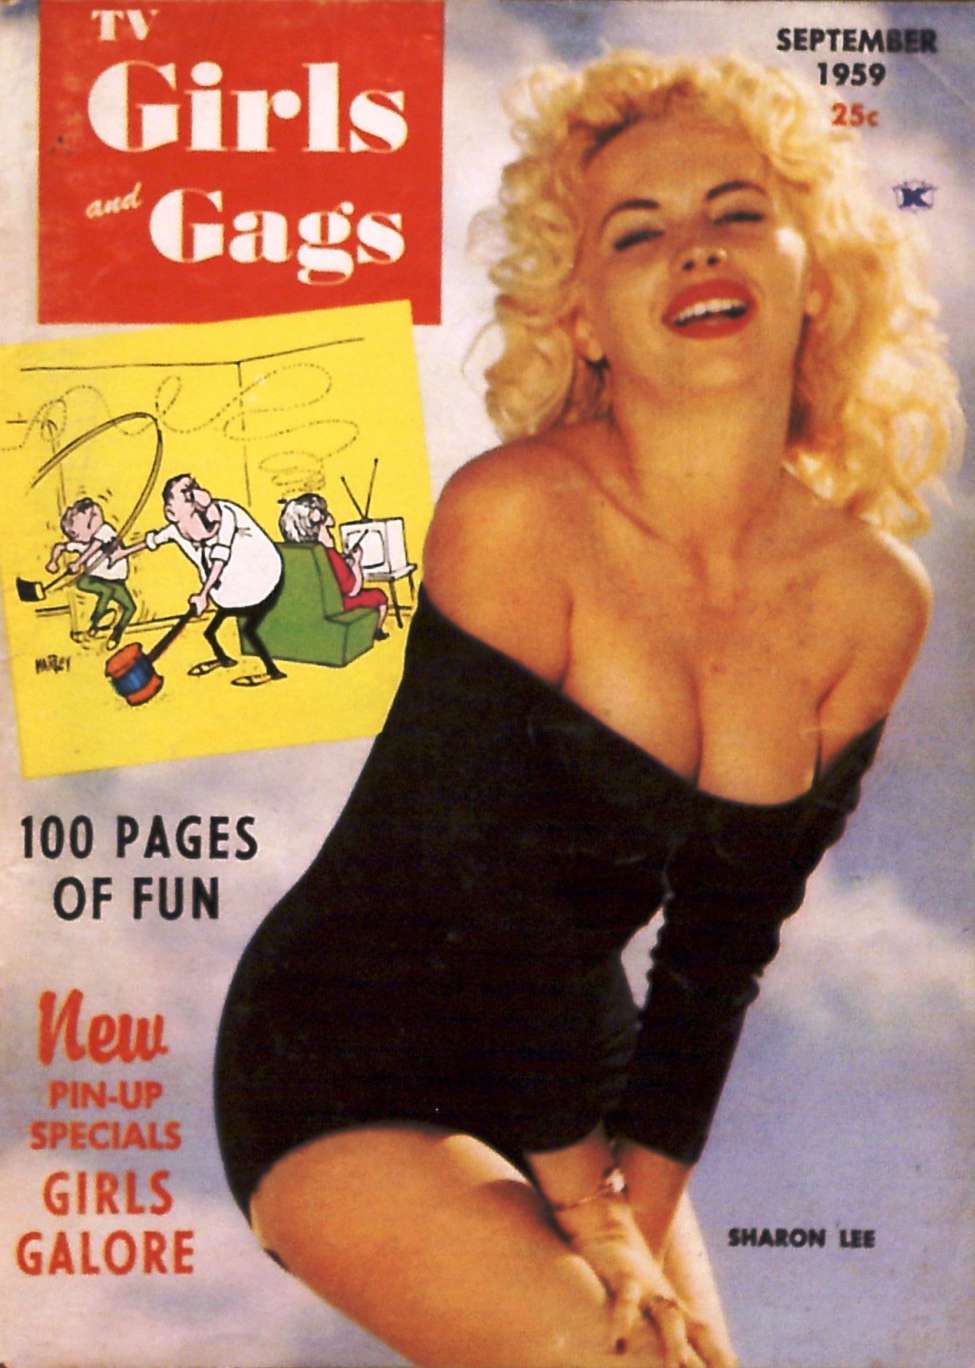 Book Cover For TV Girls and Gags v6 5